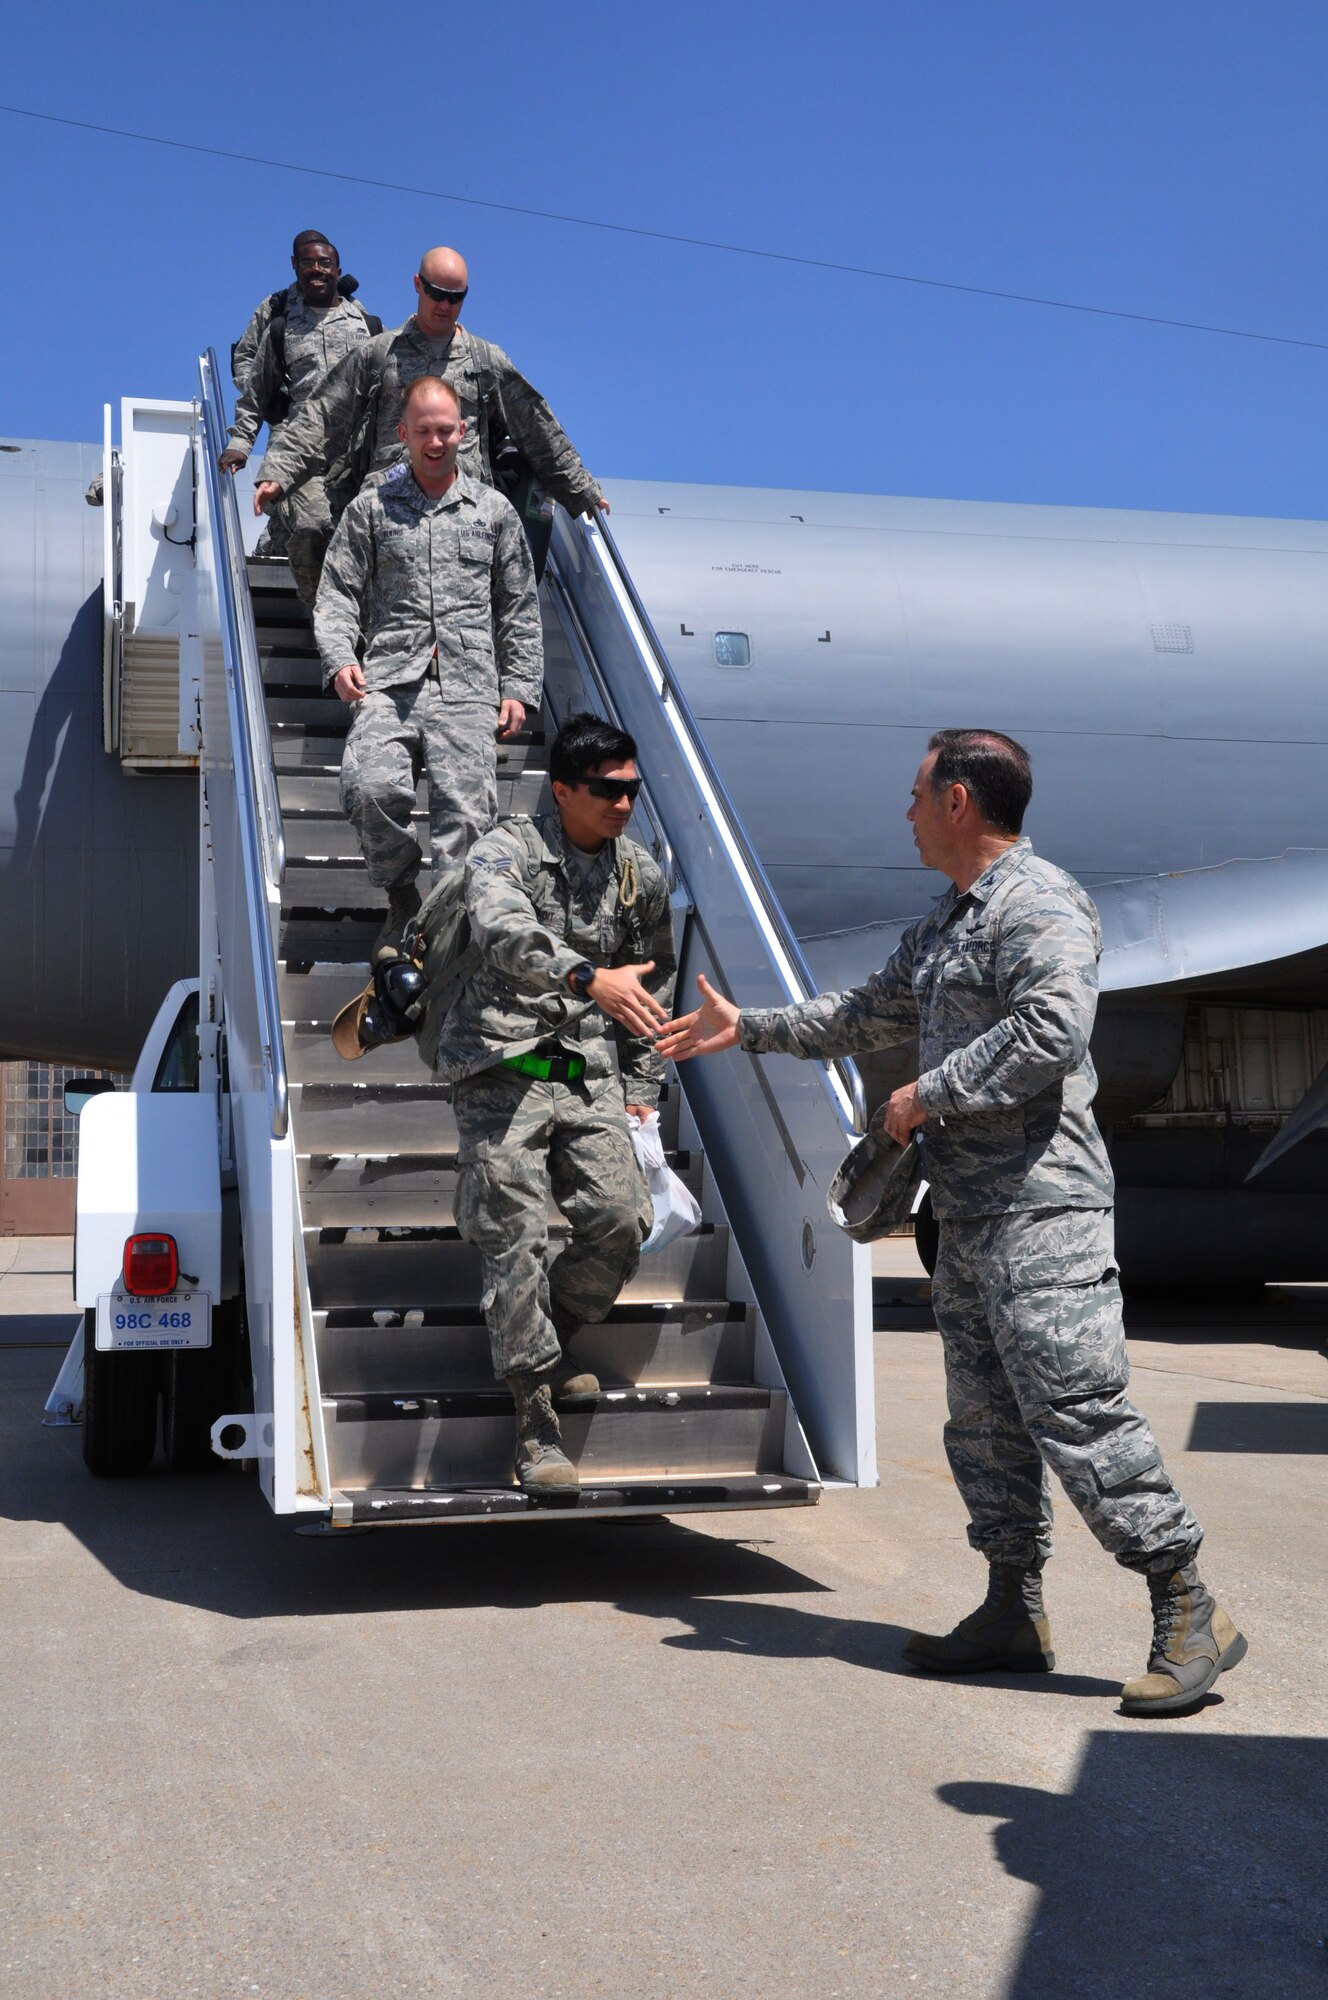 Col. Mark S. Larson, 931st Air Refueling Group commander, greets members of the 931 ARG, as they return from a deployment April 16, 2015, at McConnell Air Force Base.  More than 15 members of the 931st Air Refueling Group returned from a deployment to Southwest Asia. (U.S. Air Force photo by Tech. Sgt. Abigail Klein)